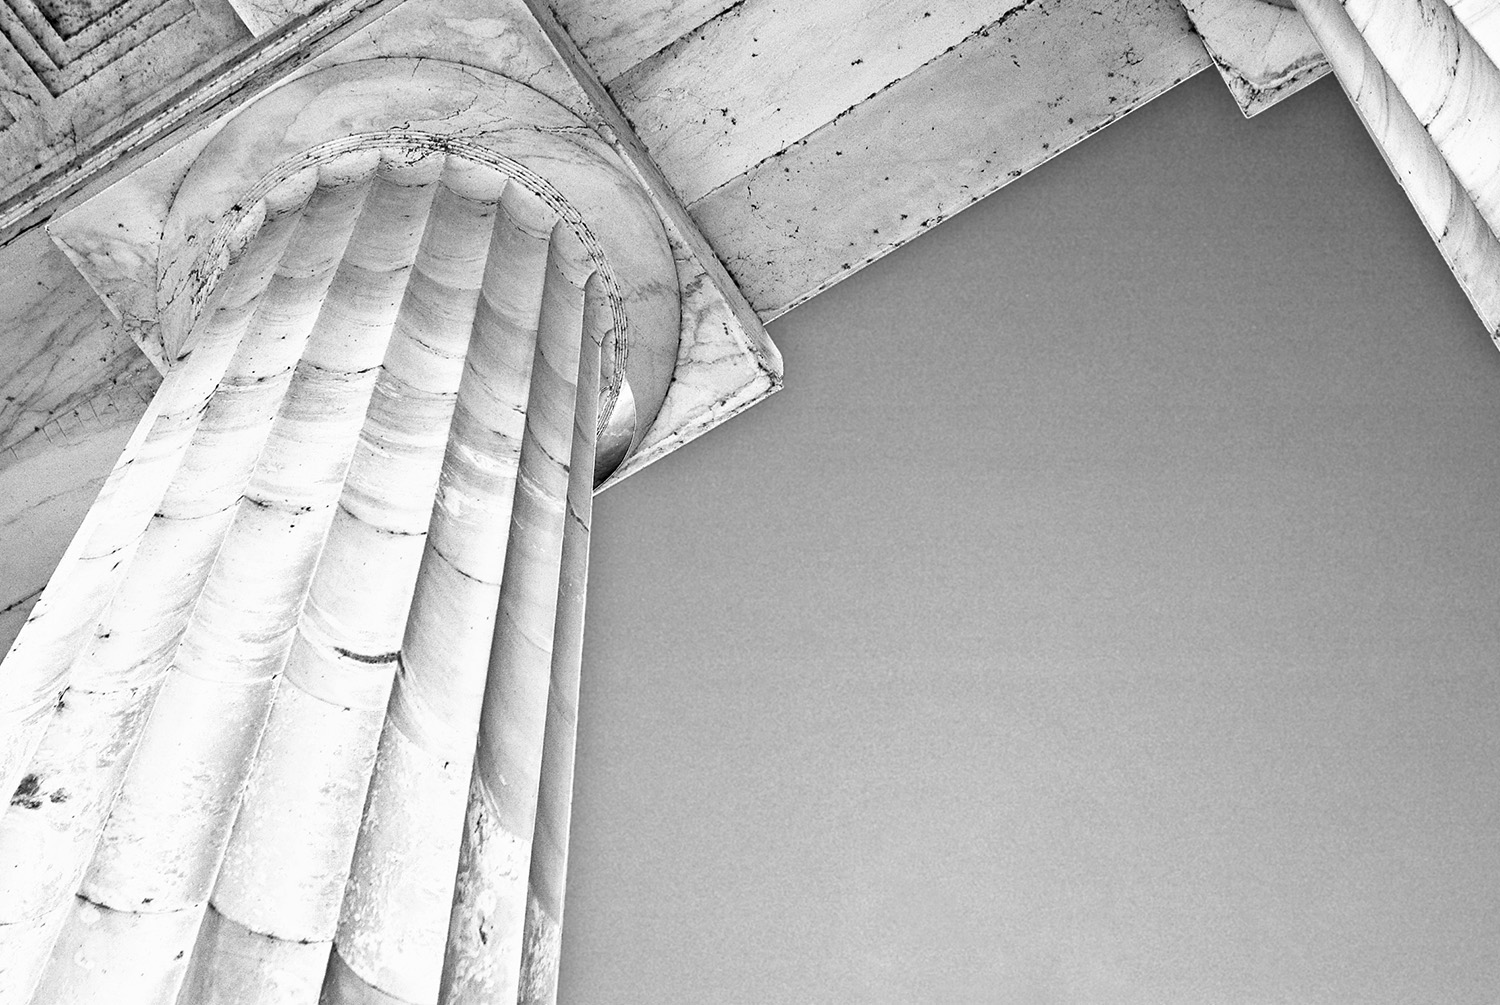 Architecture_Lincoln_Memorial_Column_Black_and_White_Marble_Tourism.jpg